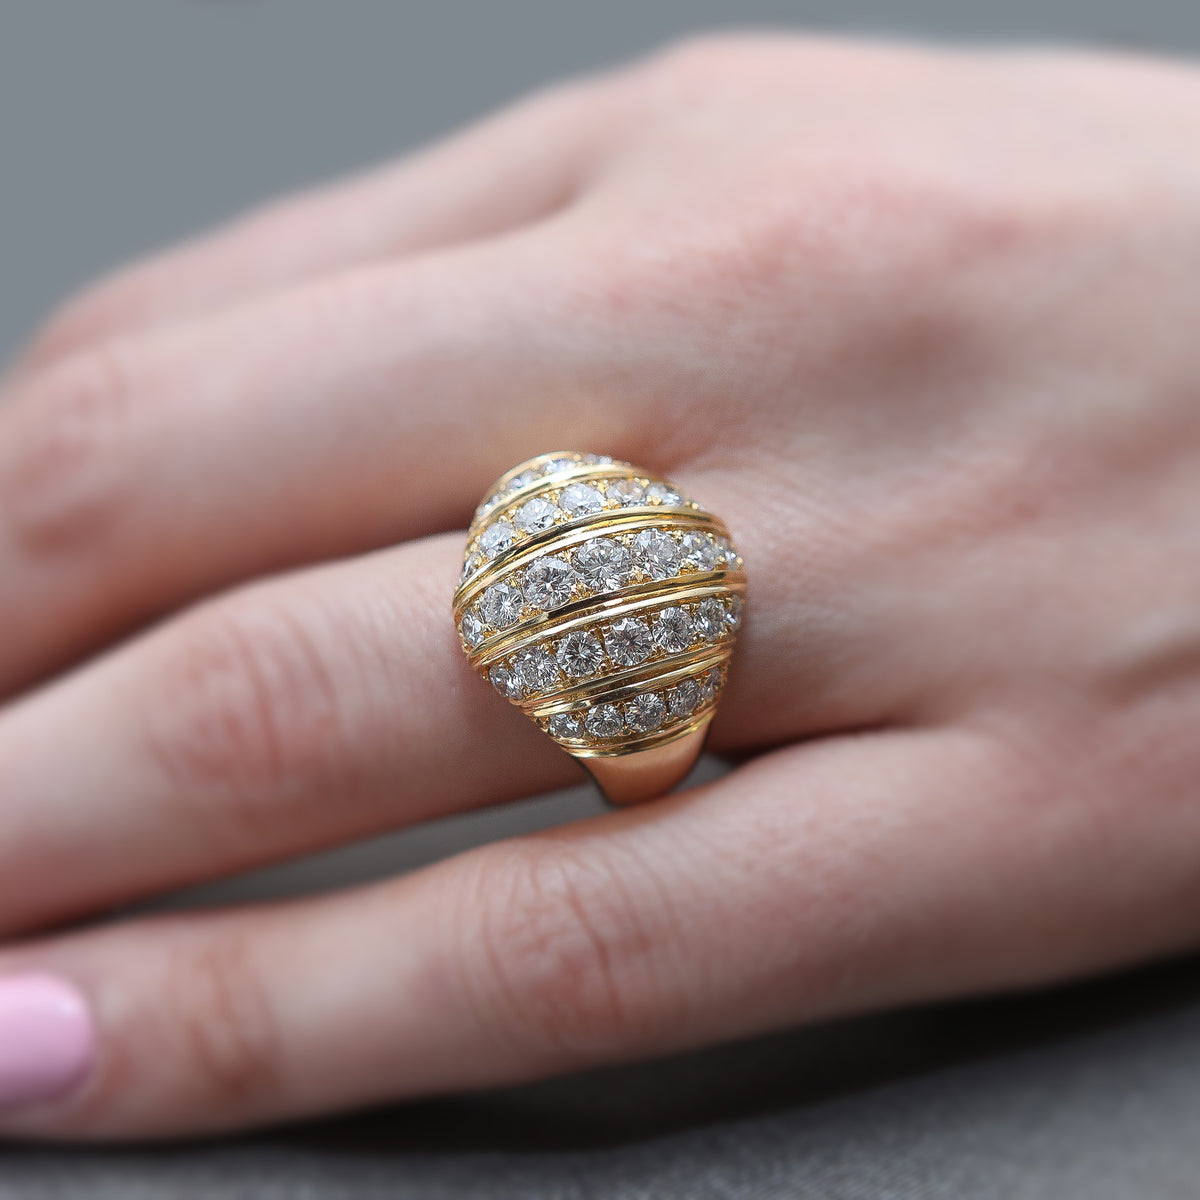 The same ring being modeled on a hand.